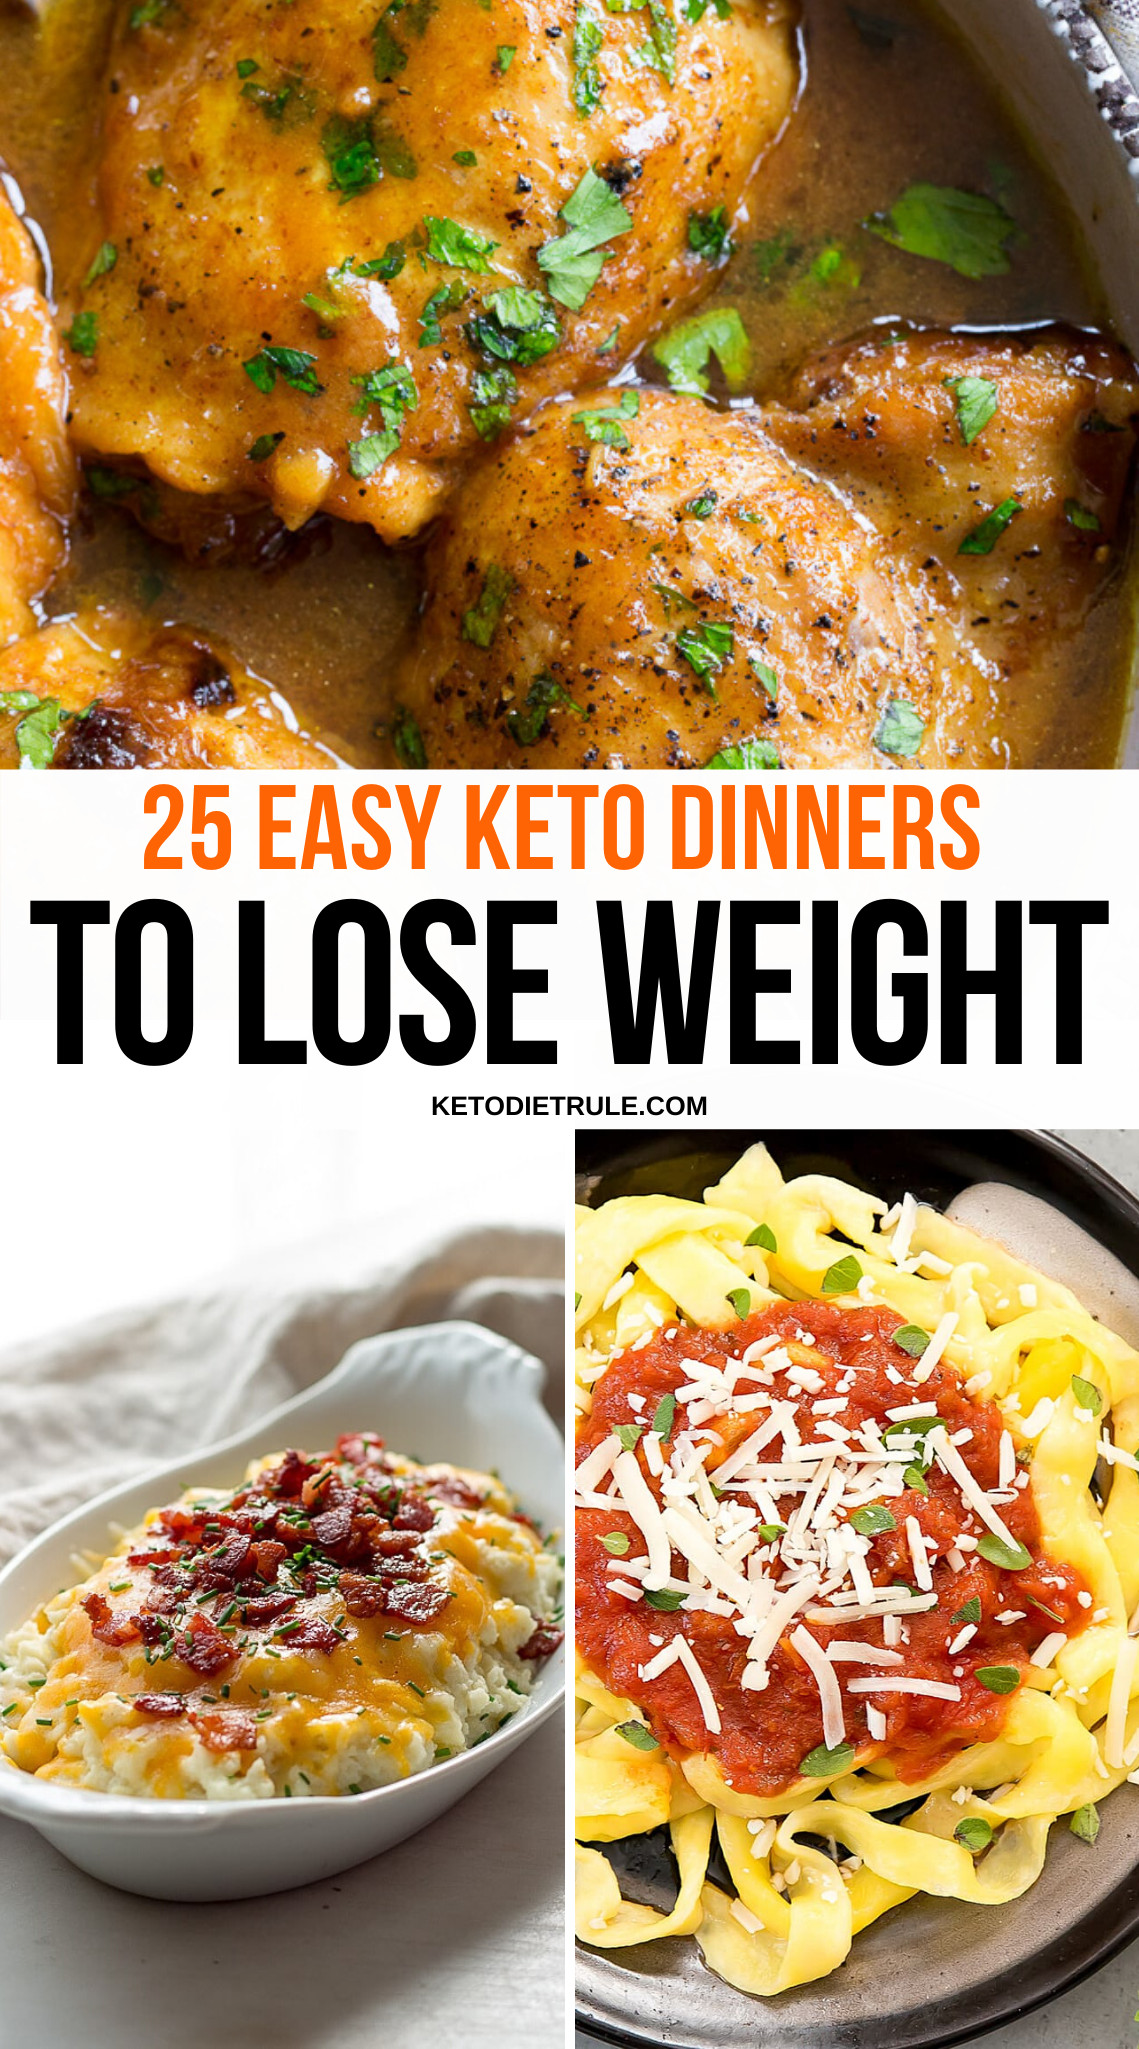 Healthy Keto Dinner Recipes For Two
 25 Quick & Easy Keto Dinner Recipes to Make Tonight in